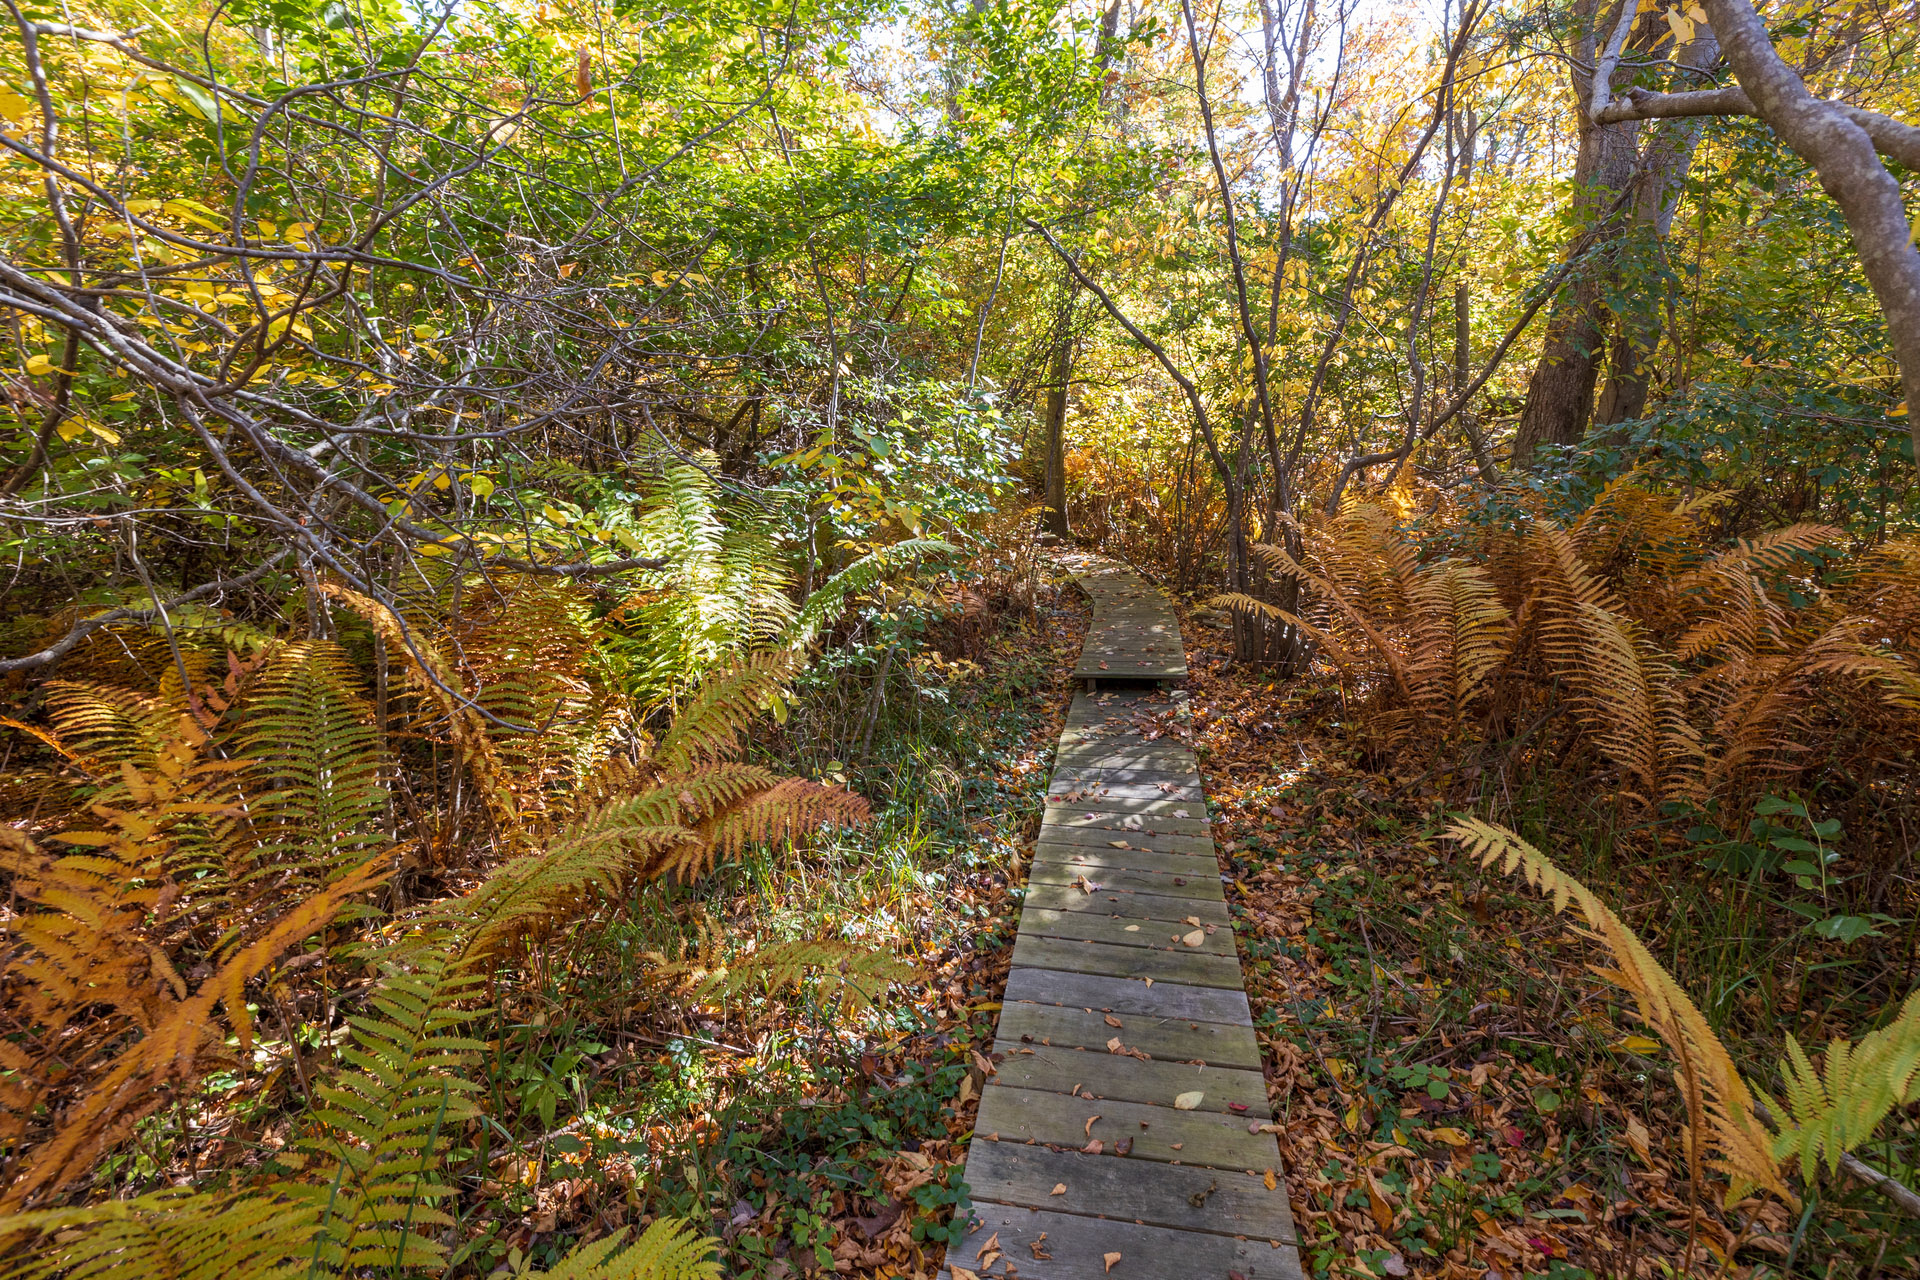 A boardwalk in the middle of dense shrubbery. Fallen orange leaves on the ground surrounding the boardwalk.